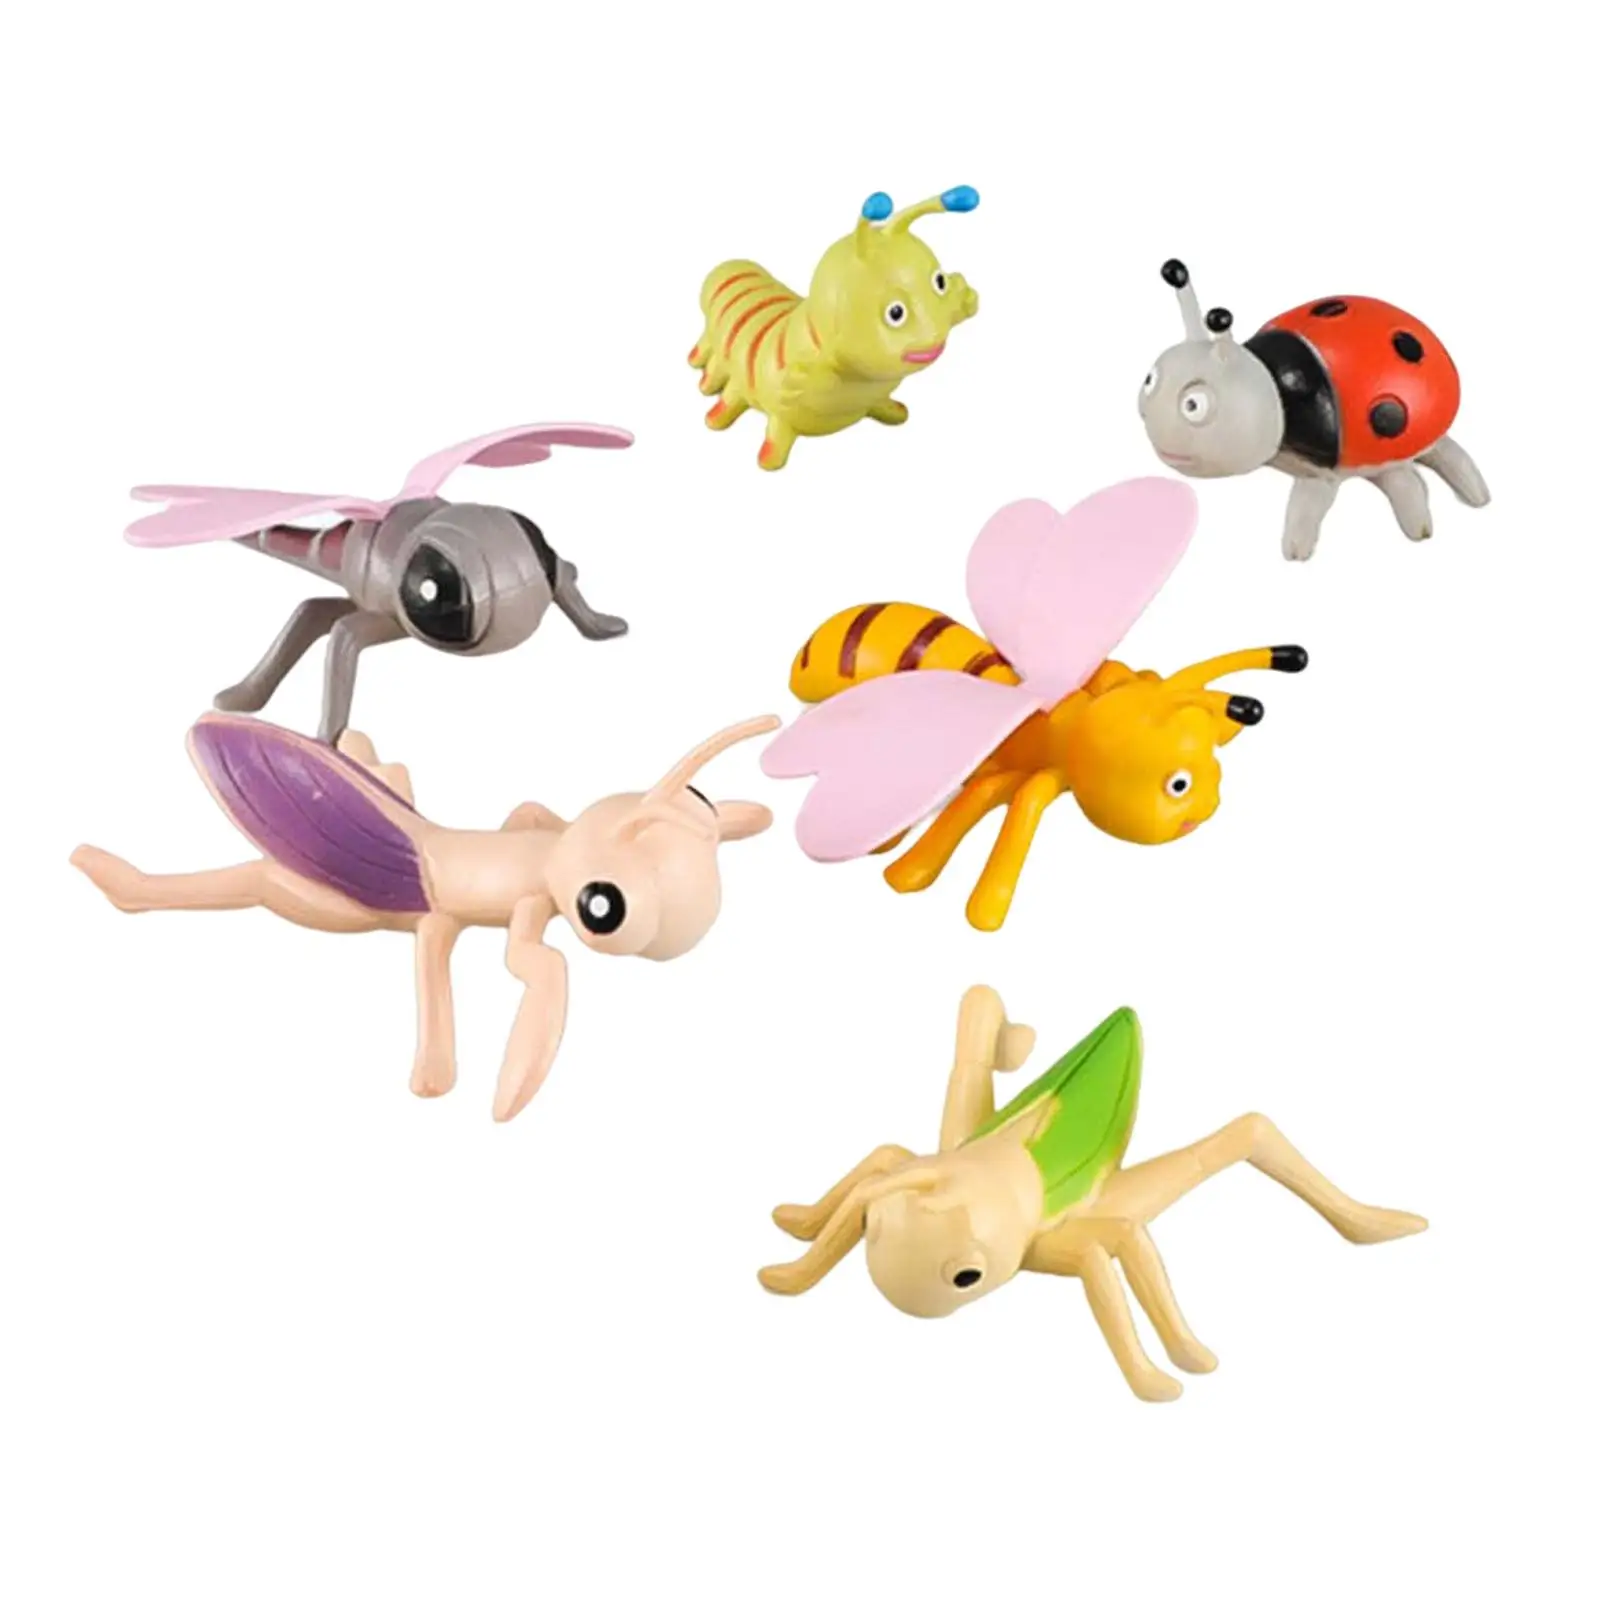 Set of 6 Count Artifical Animal Model Toy for Toddler Accessories Party Favors Educational Toys